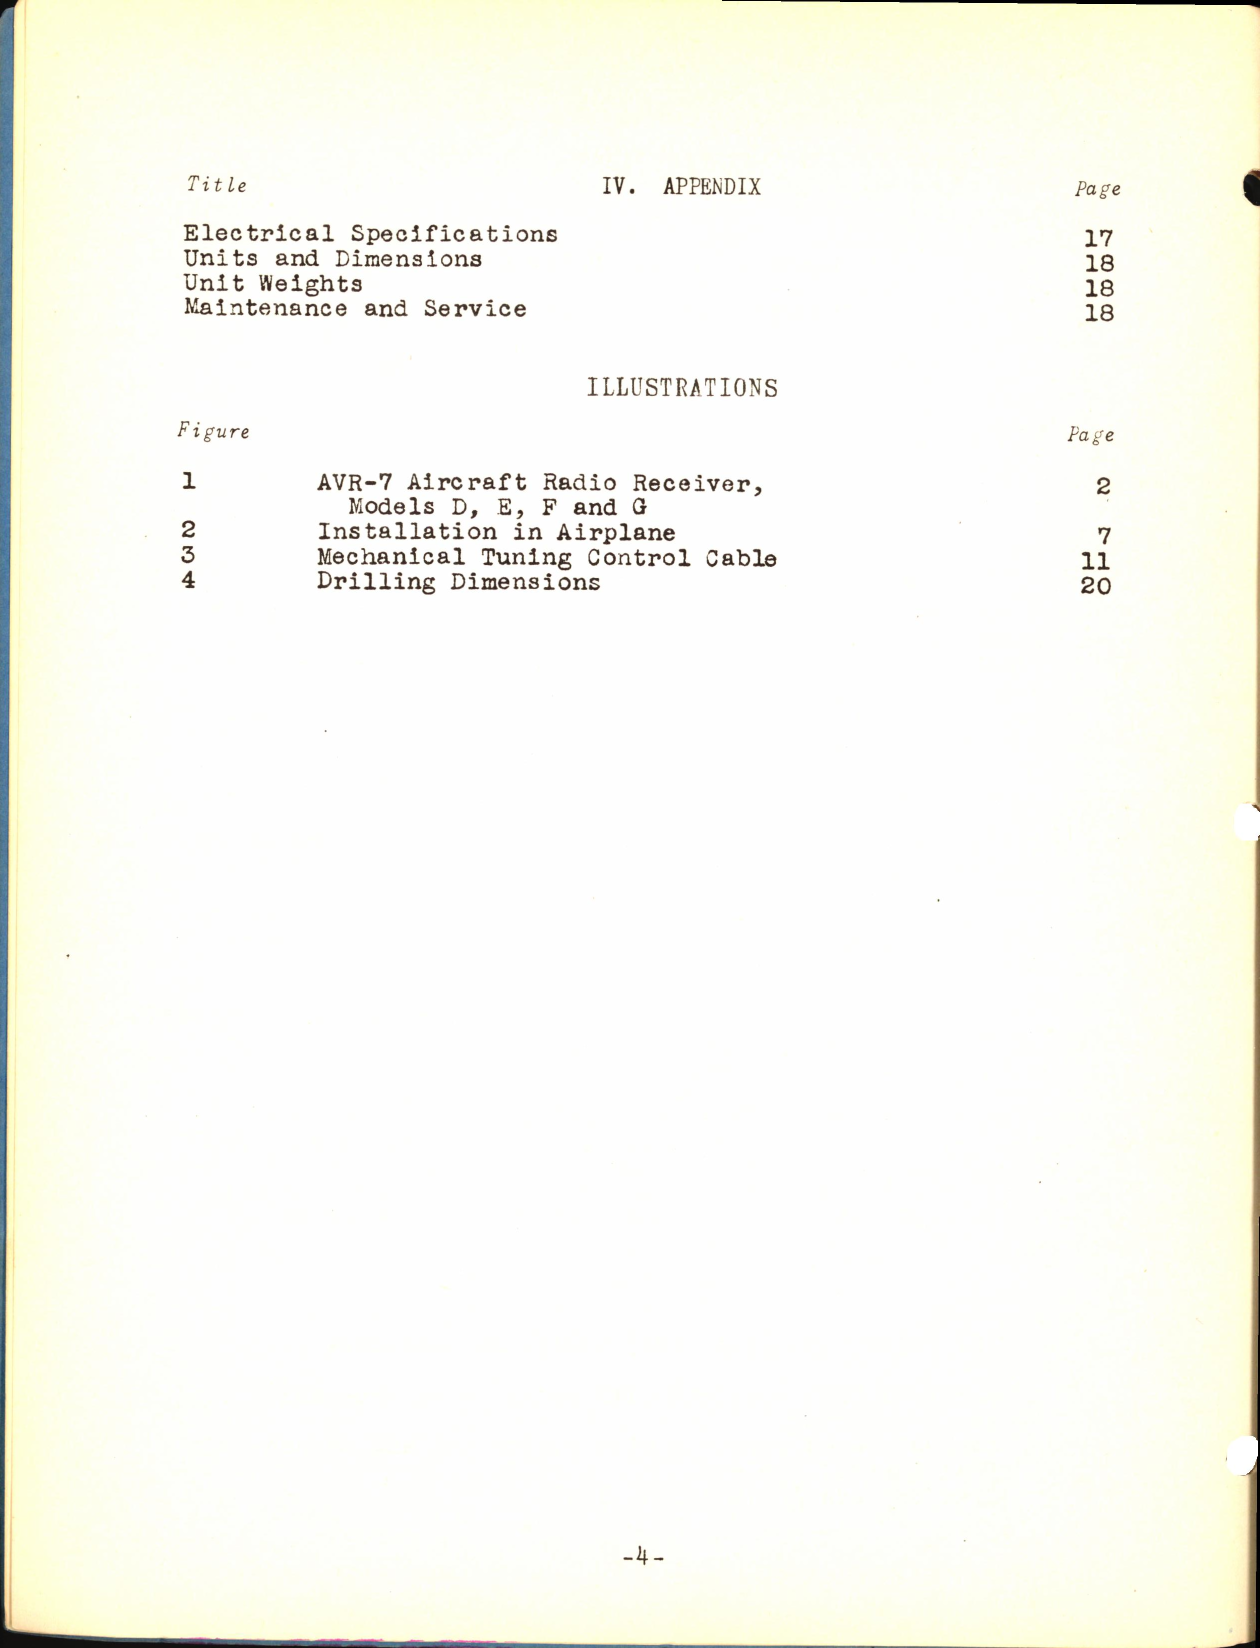 Sample page 6 from AirCorps Library document: RCA Aircraft Radio Receiver